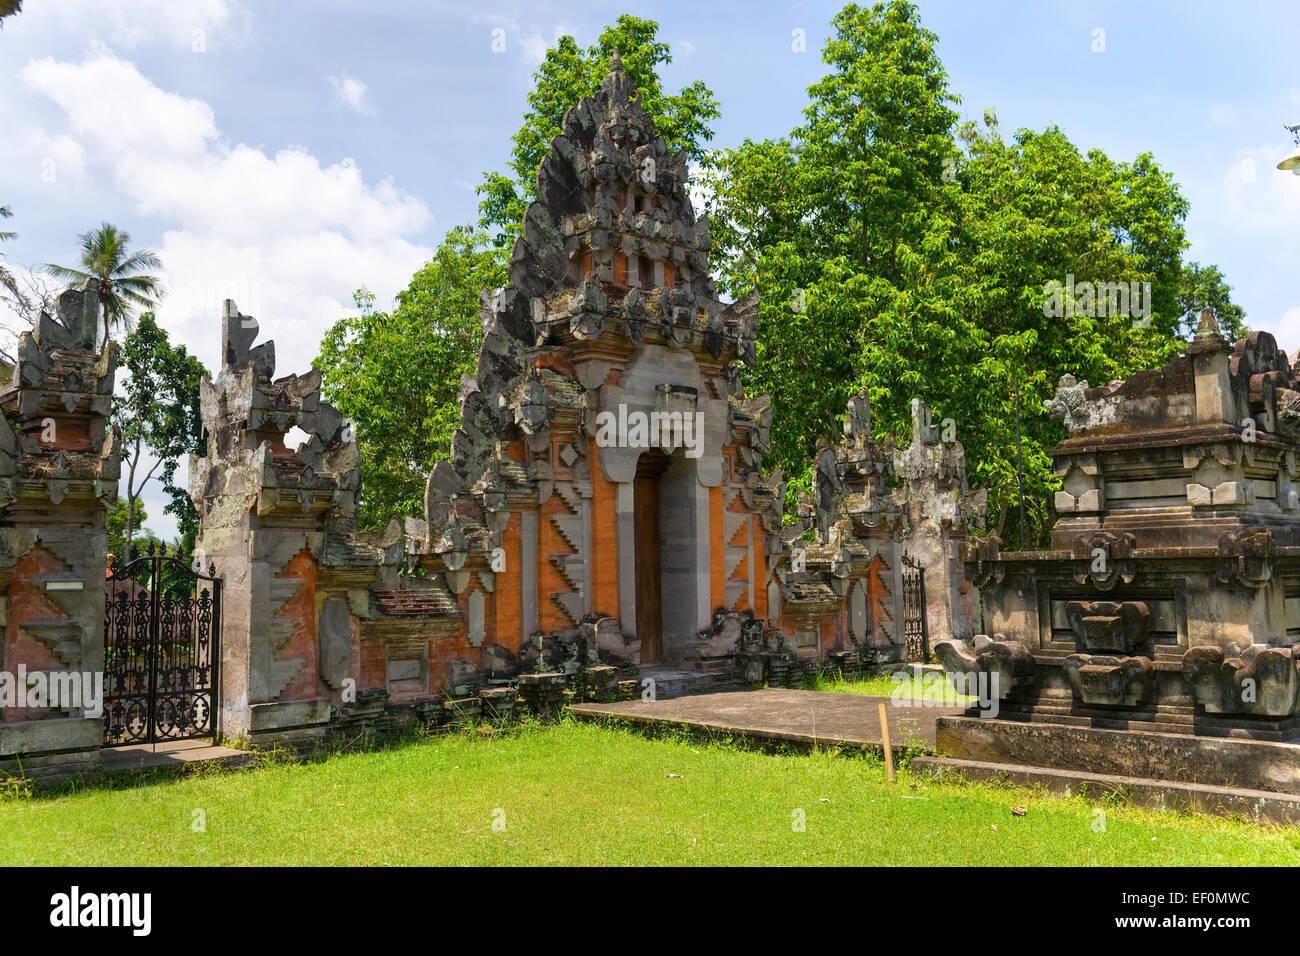 Entrance of an Indu temple in Ubud, Bali, Indonesia. Stock Photo